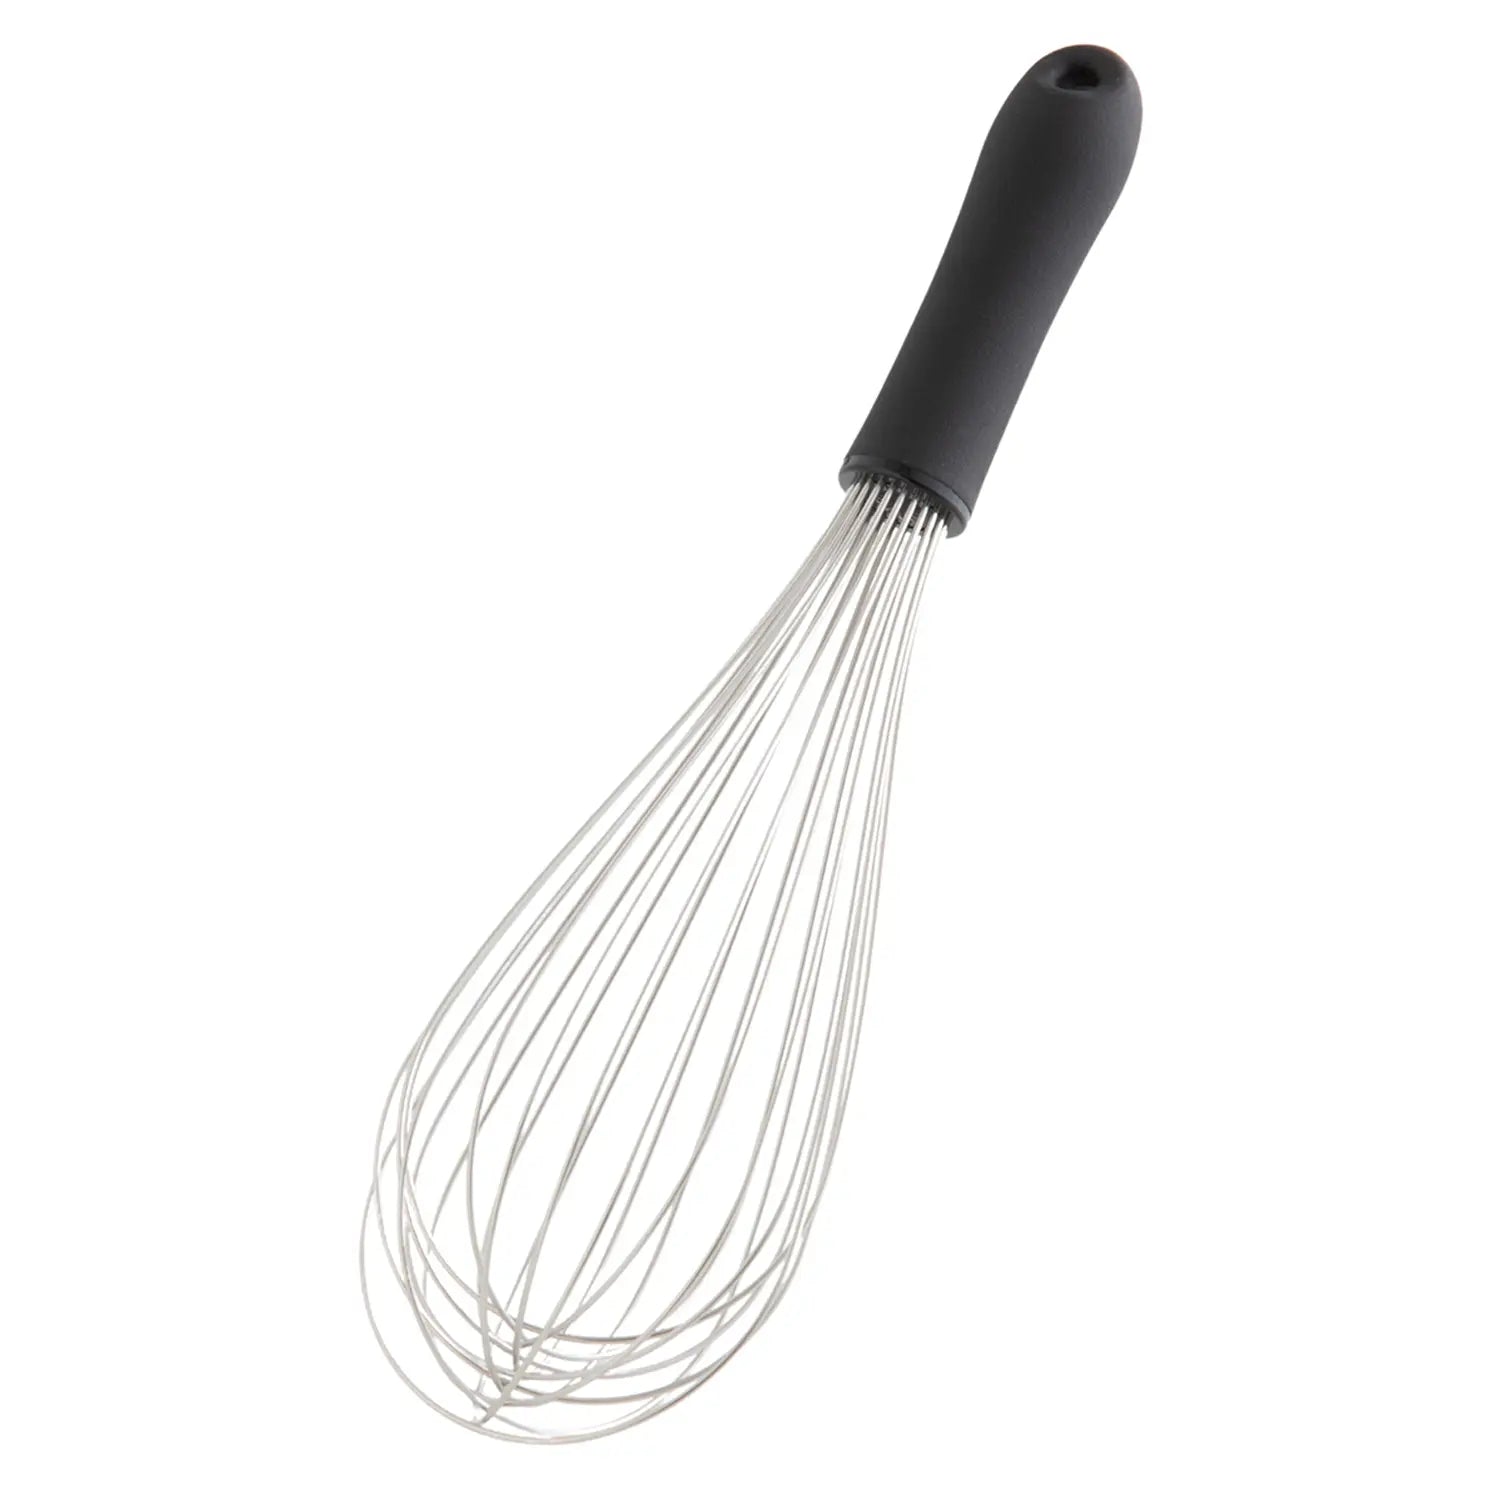 7 Perforated Tongs - Whisk